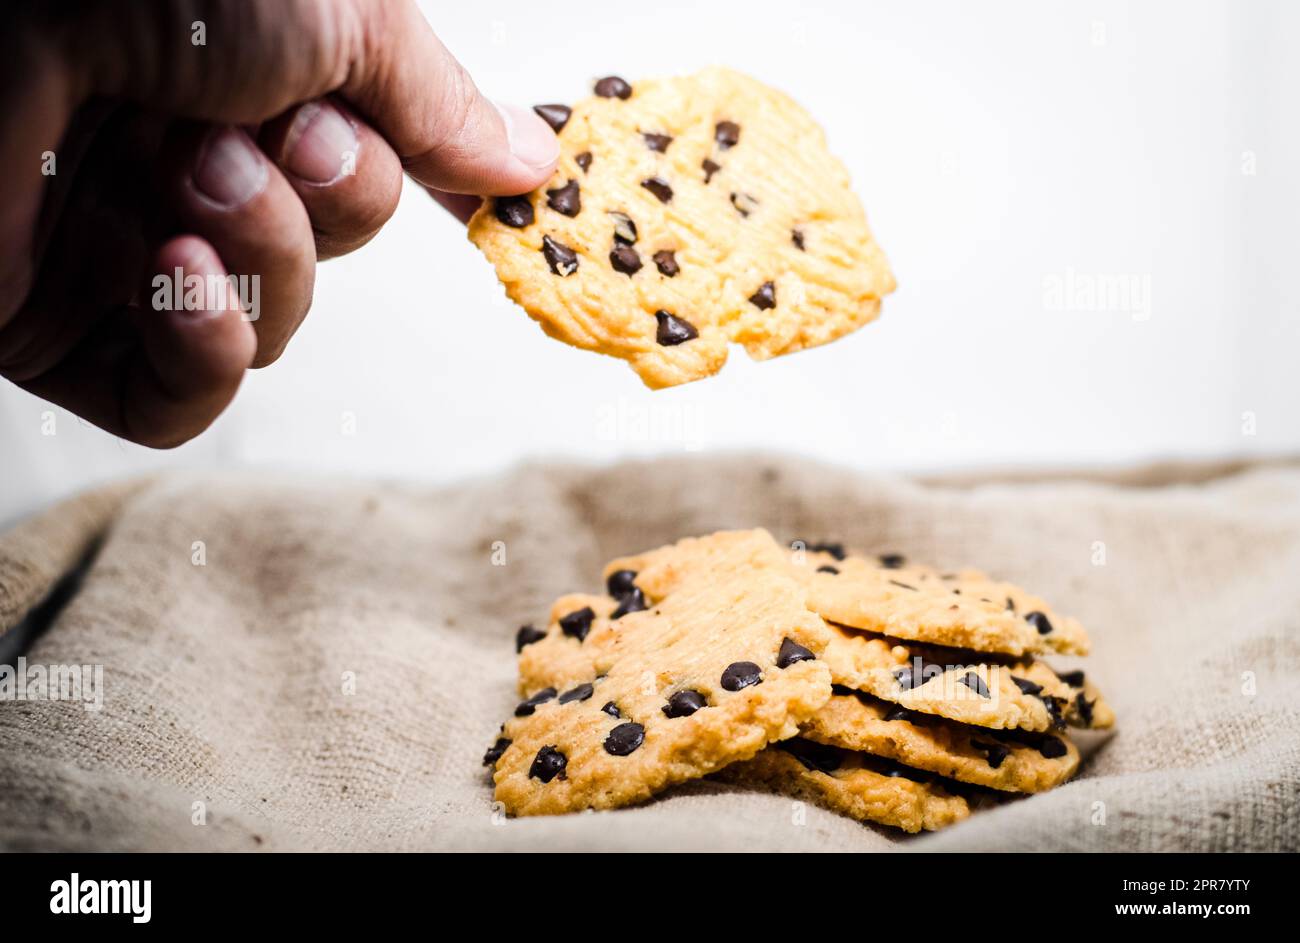 hand take a Chocolate Chip Cookie Bakery Cheesecake Baking sweet food snack object still life Stock Photo